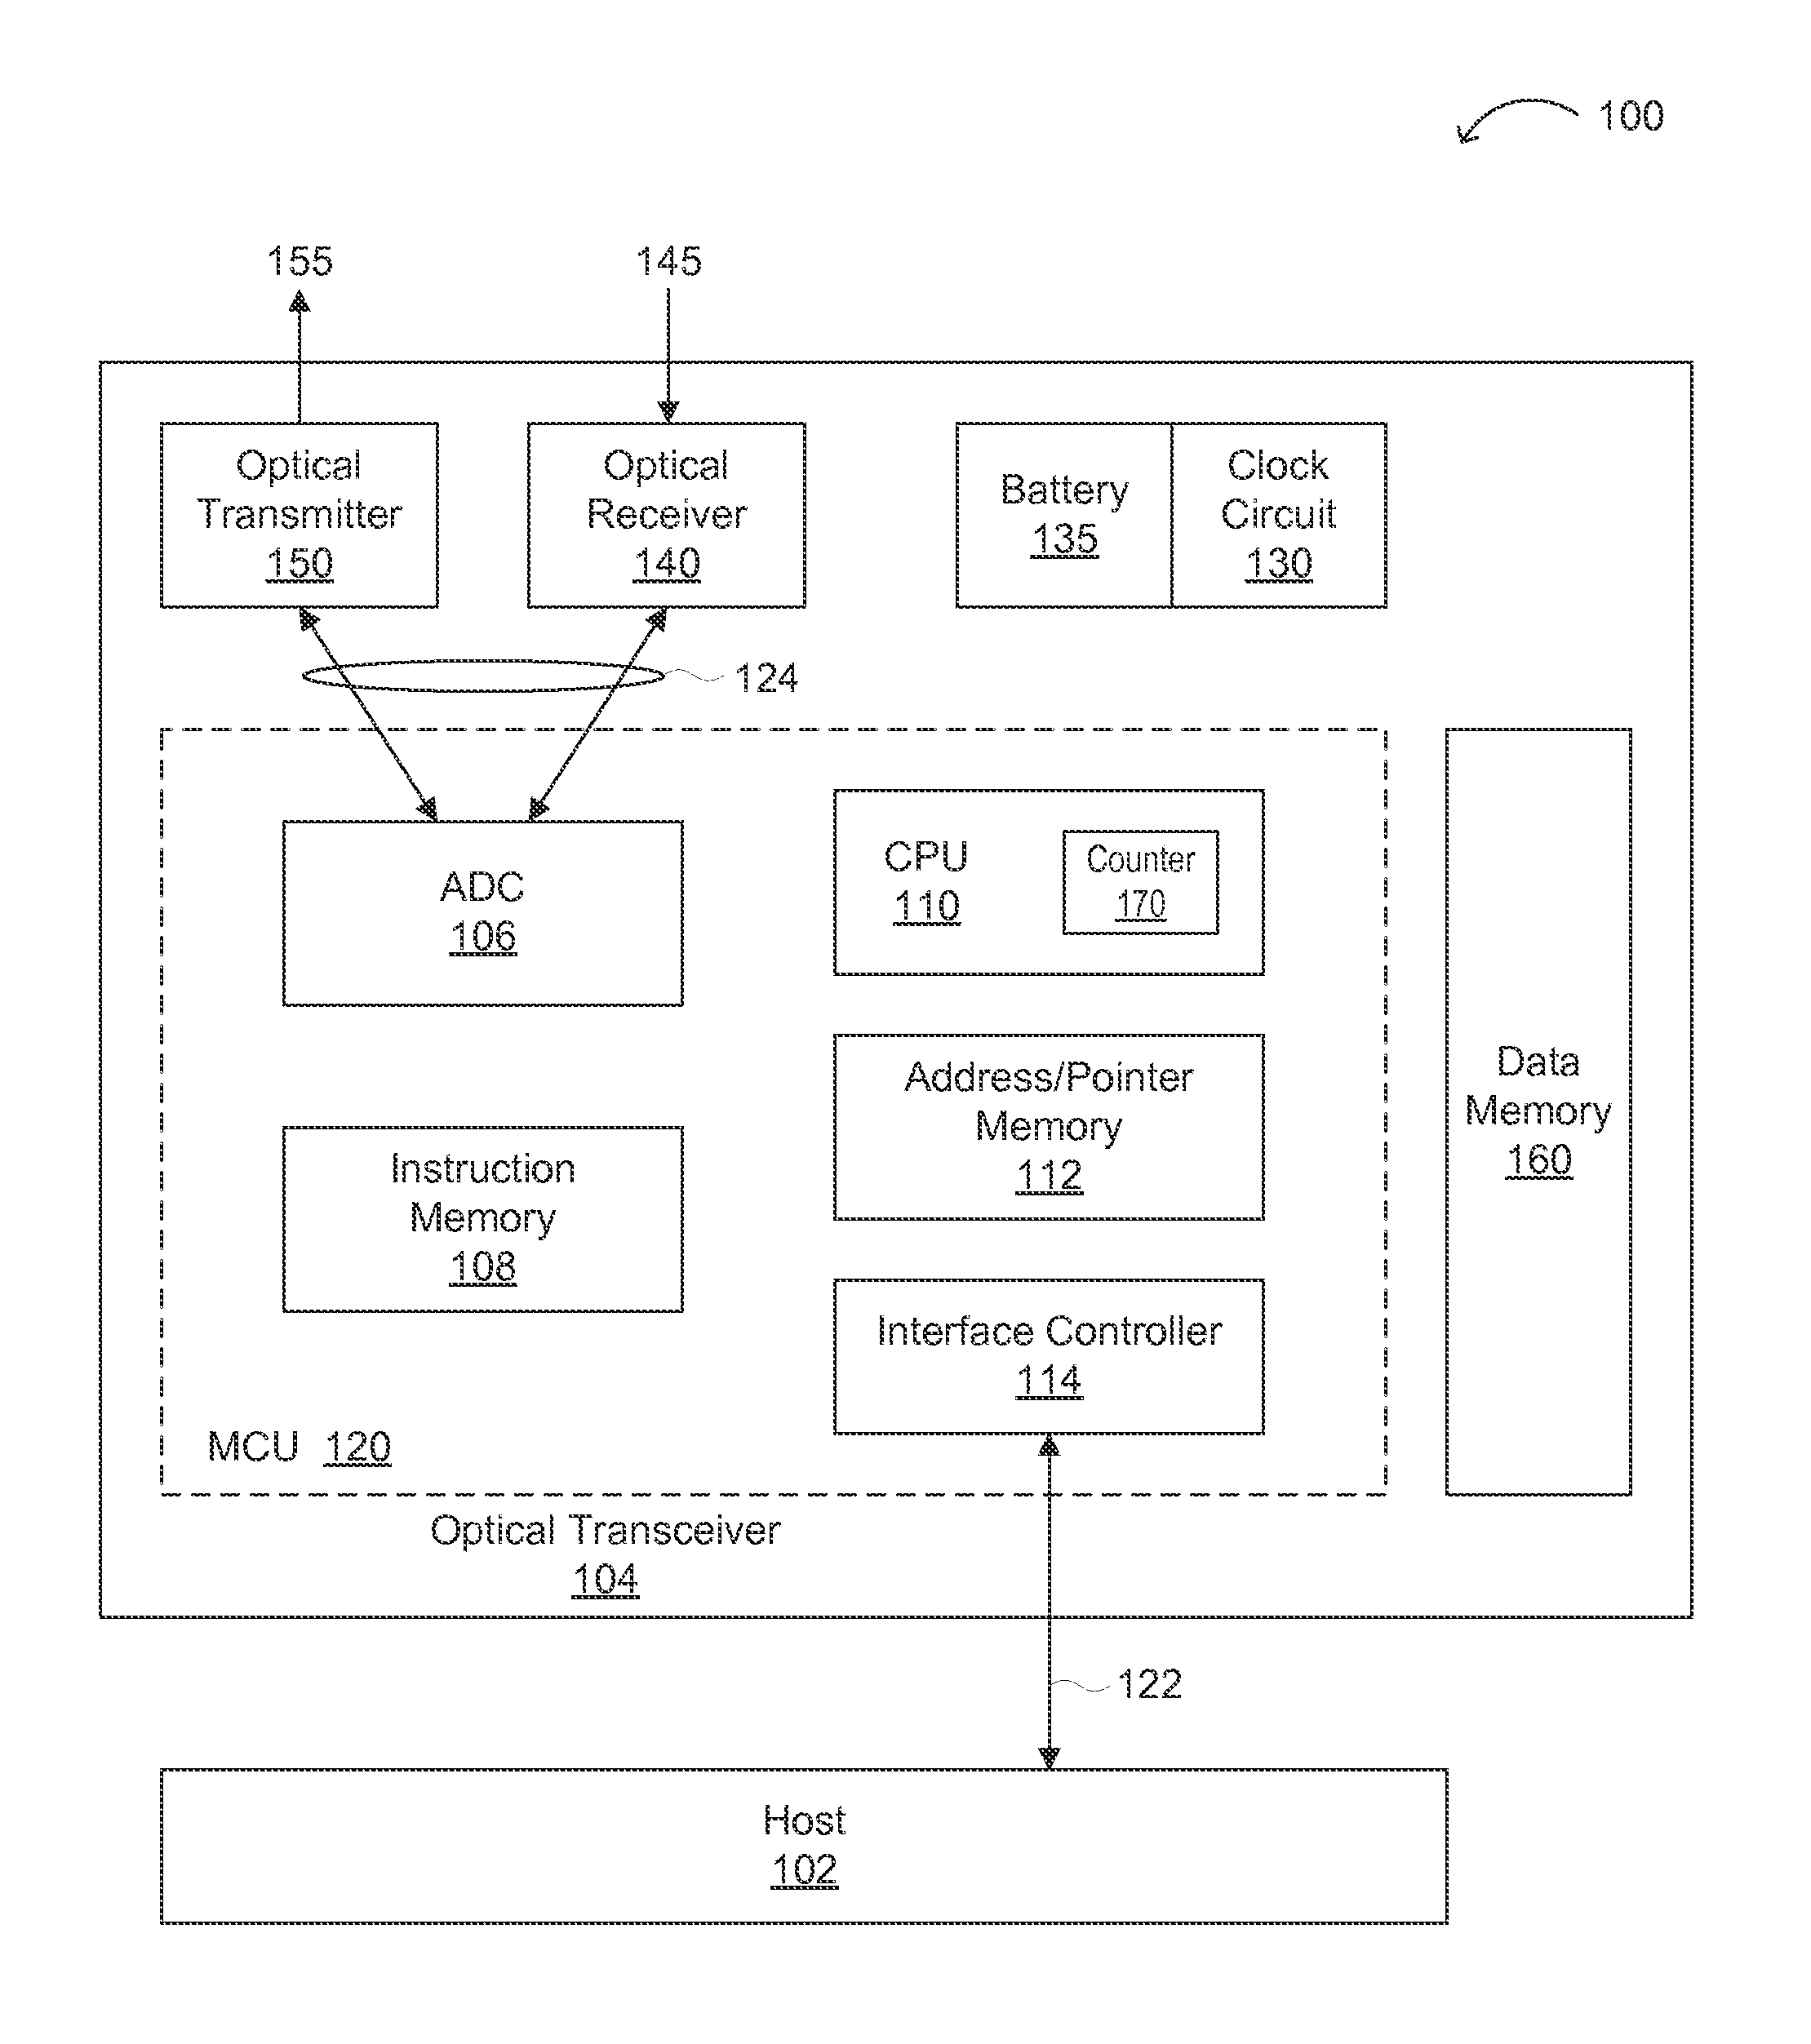 Enhanced status monitoring, storage and reporting for optical transceivers